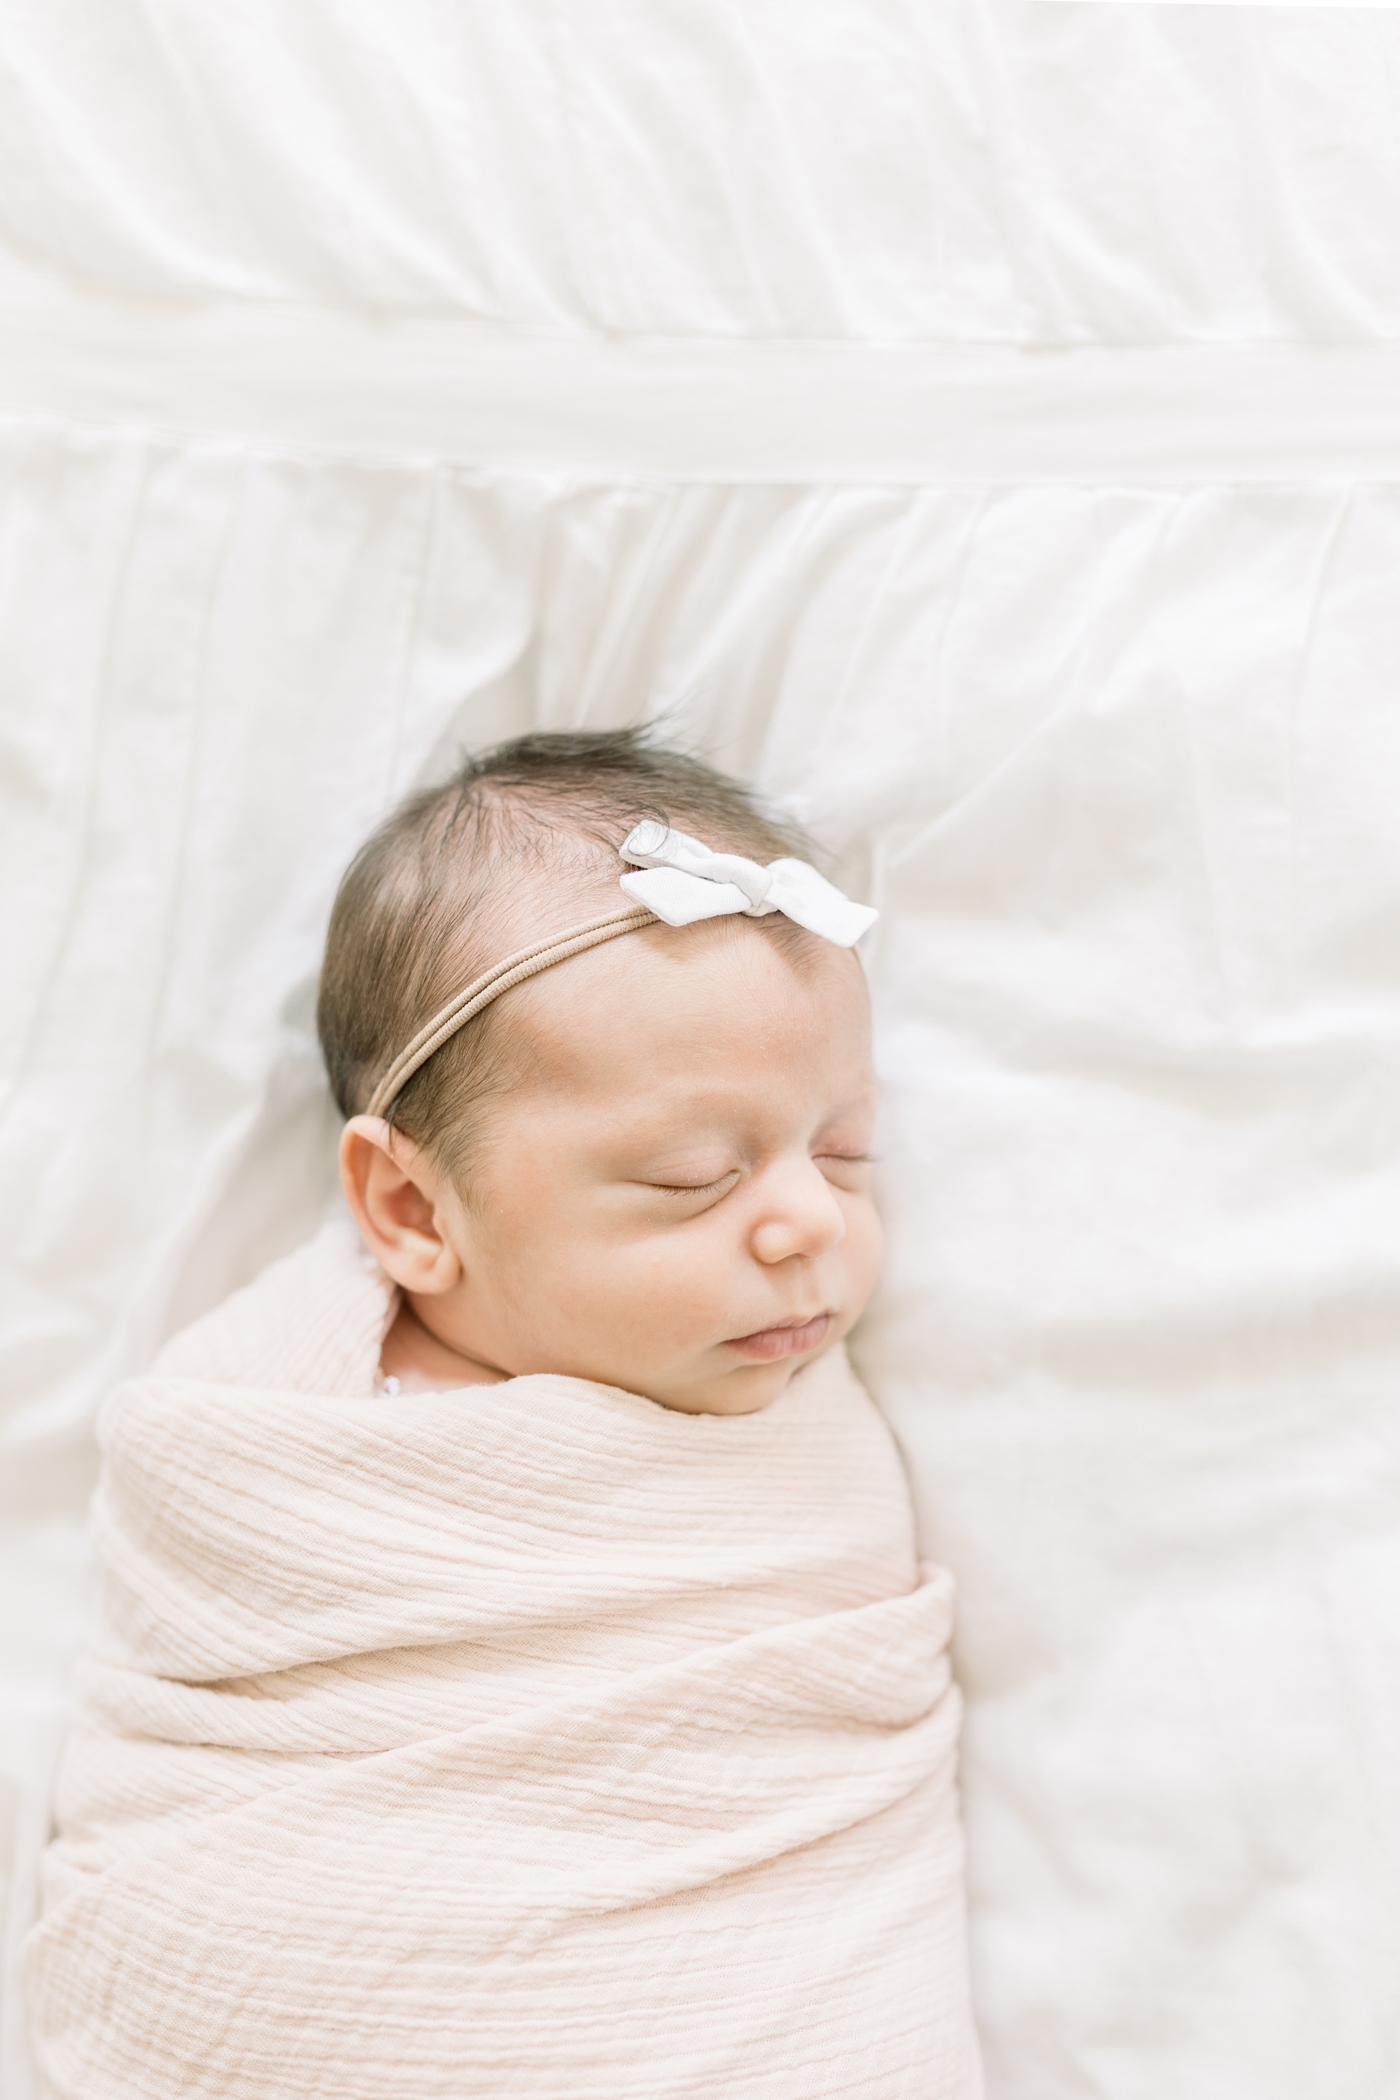 Baby girl wrapped in pink swaddle sleeping during newborn session in Mount Pleasant, SC. Photo by Caitlyn Motycka Photography.